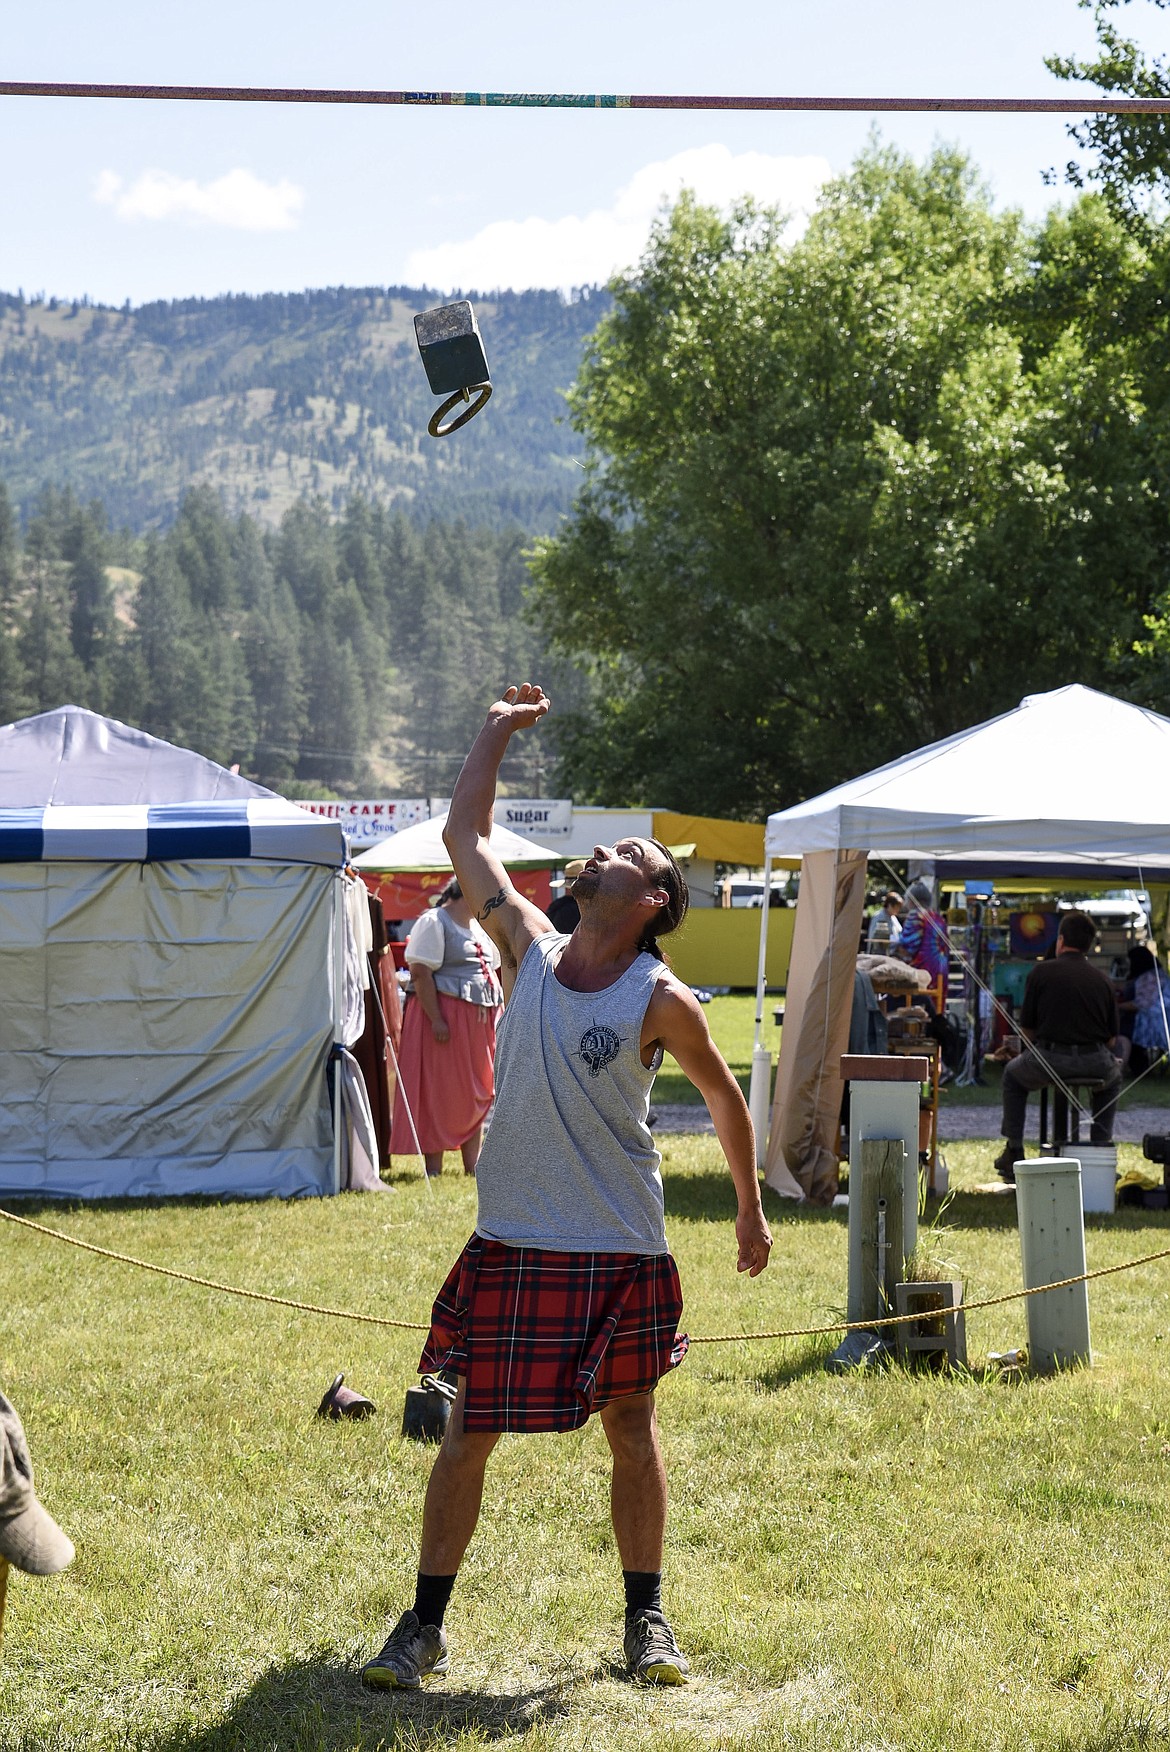 Jeremy Nelson, from Bonners Ferry, competes in the weigh-over-bar, Saturday at the Kootenai Highland Gathering and Celtic Games. (Ben Kibbey/The Western News)